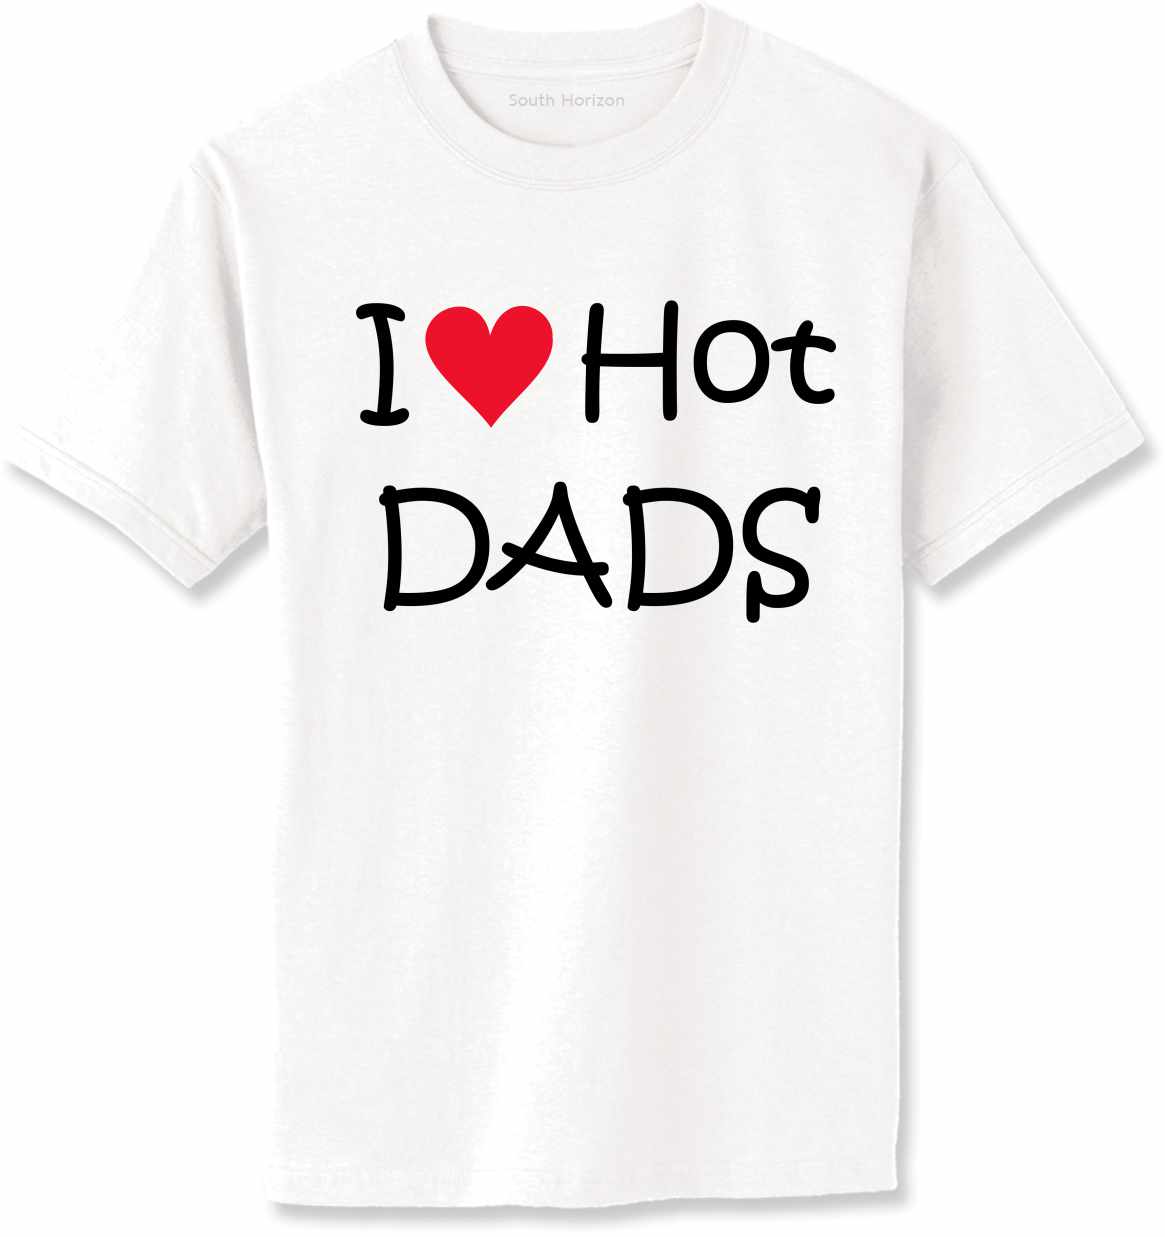 I Love Hot Dads on Adult T-Shirt (#1230-1)